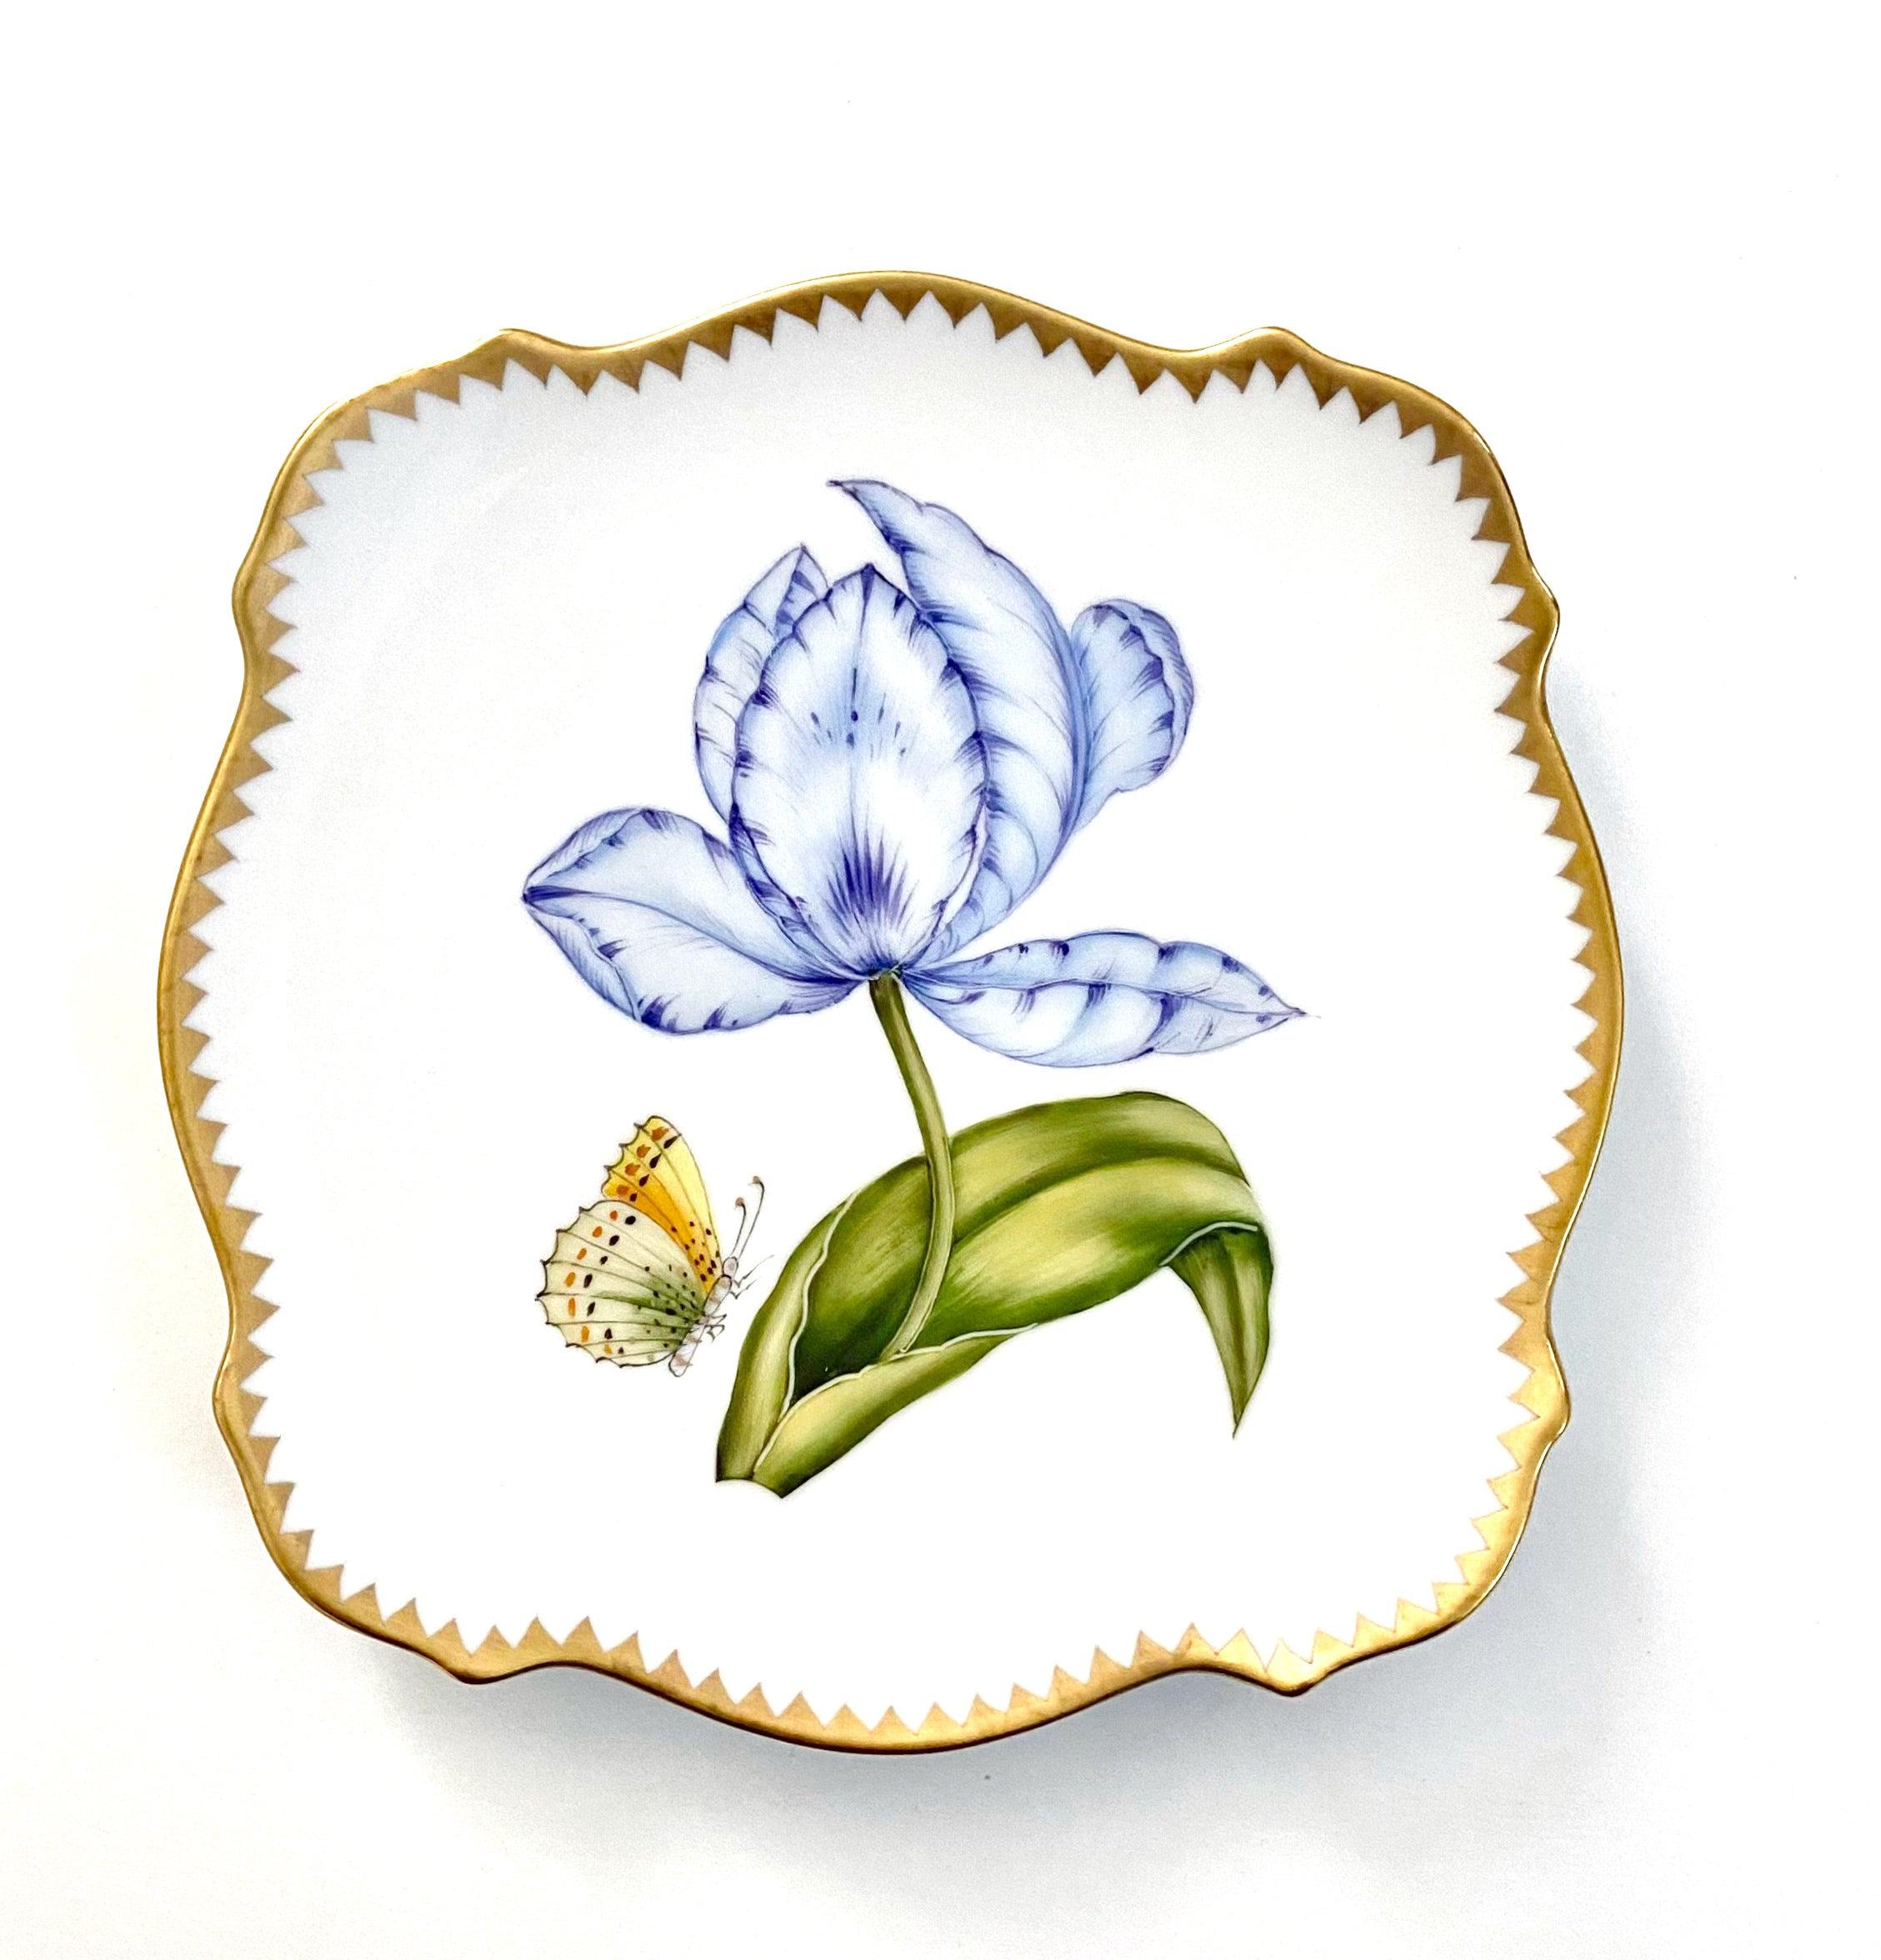 A set of 6 assorted porcelain side plates hand painted in Anna Weatherley’s studio. The designs are inspired by the paintings of Pierre-Joseph Redoute, the 18th century botanical artist. Anna Weatherley established her studio in Budapest, Hungary in